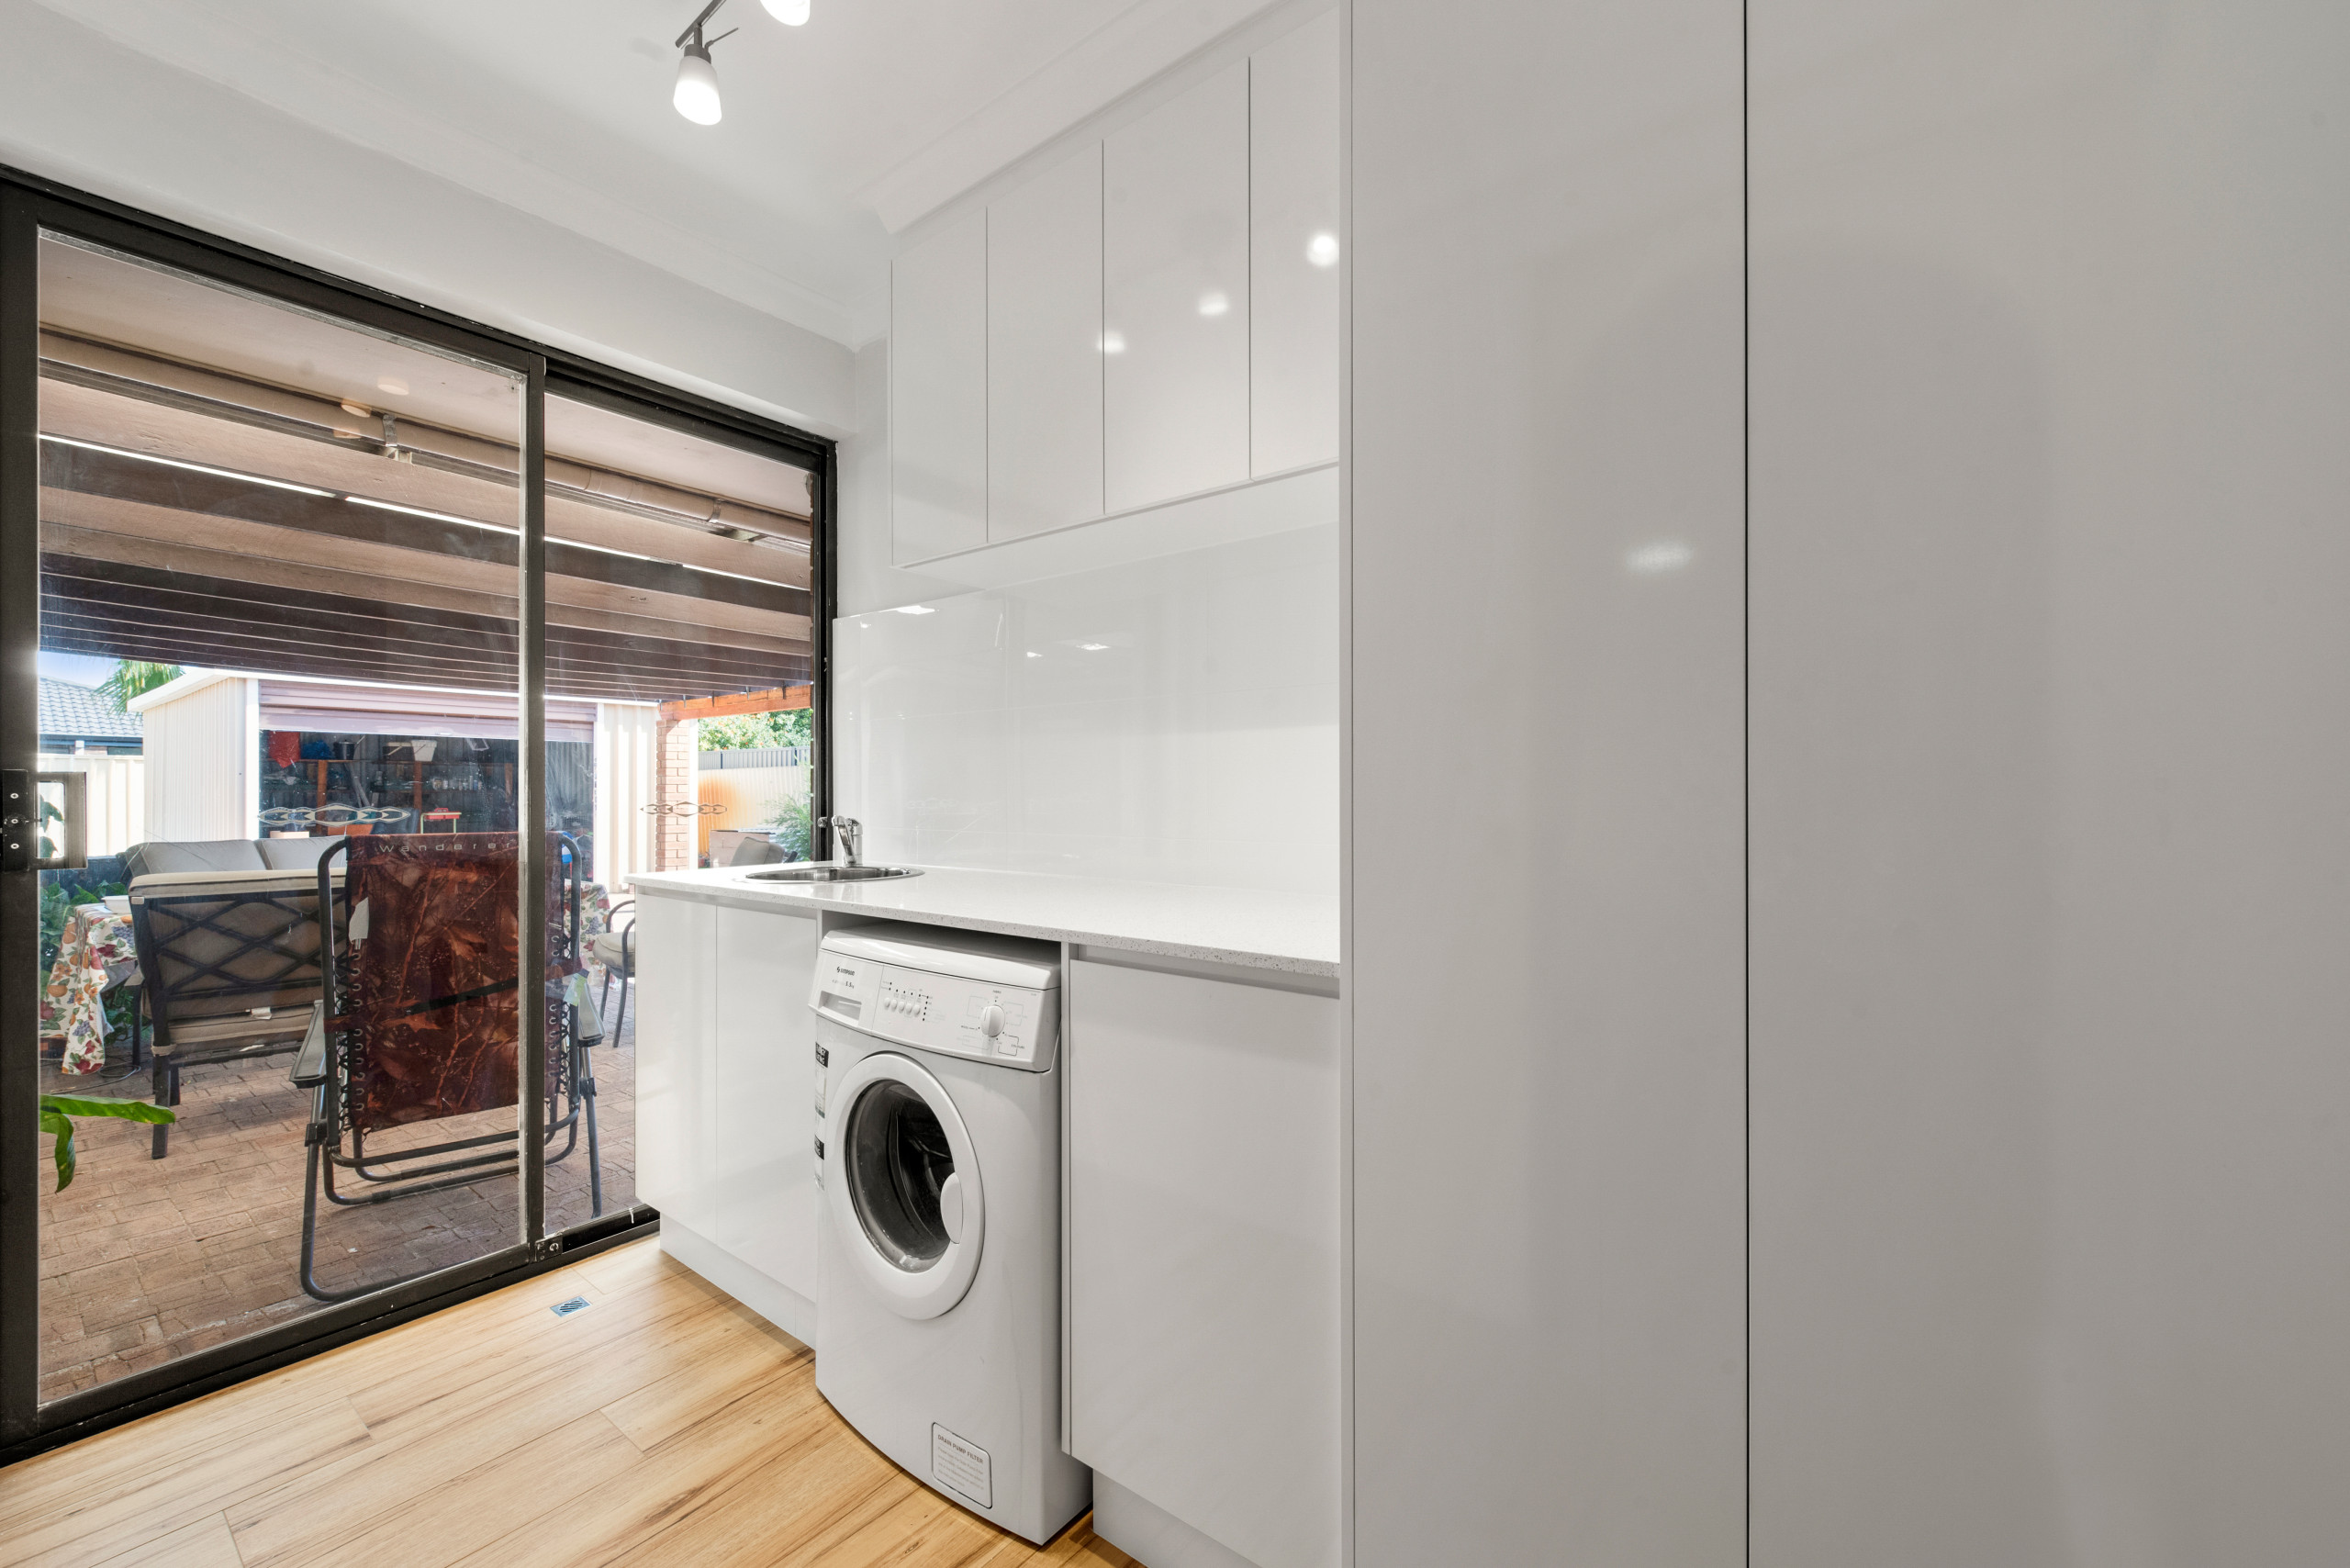 75 Yellow Floor Laundry Room Ideas You'll Love - August, 2022 | Houzz